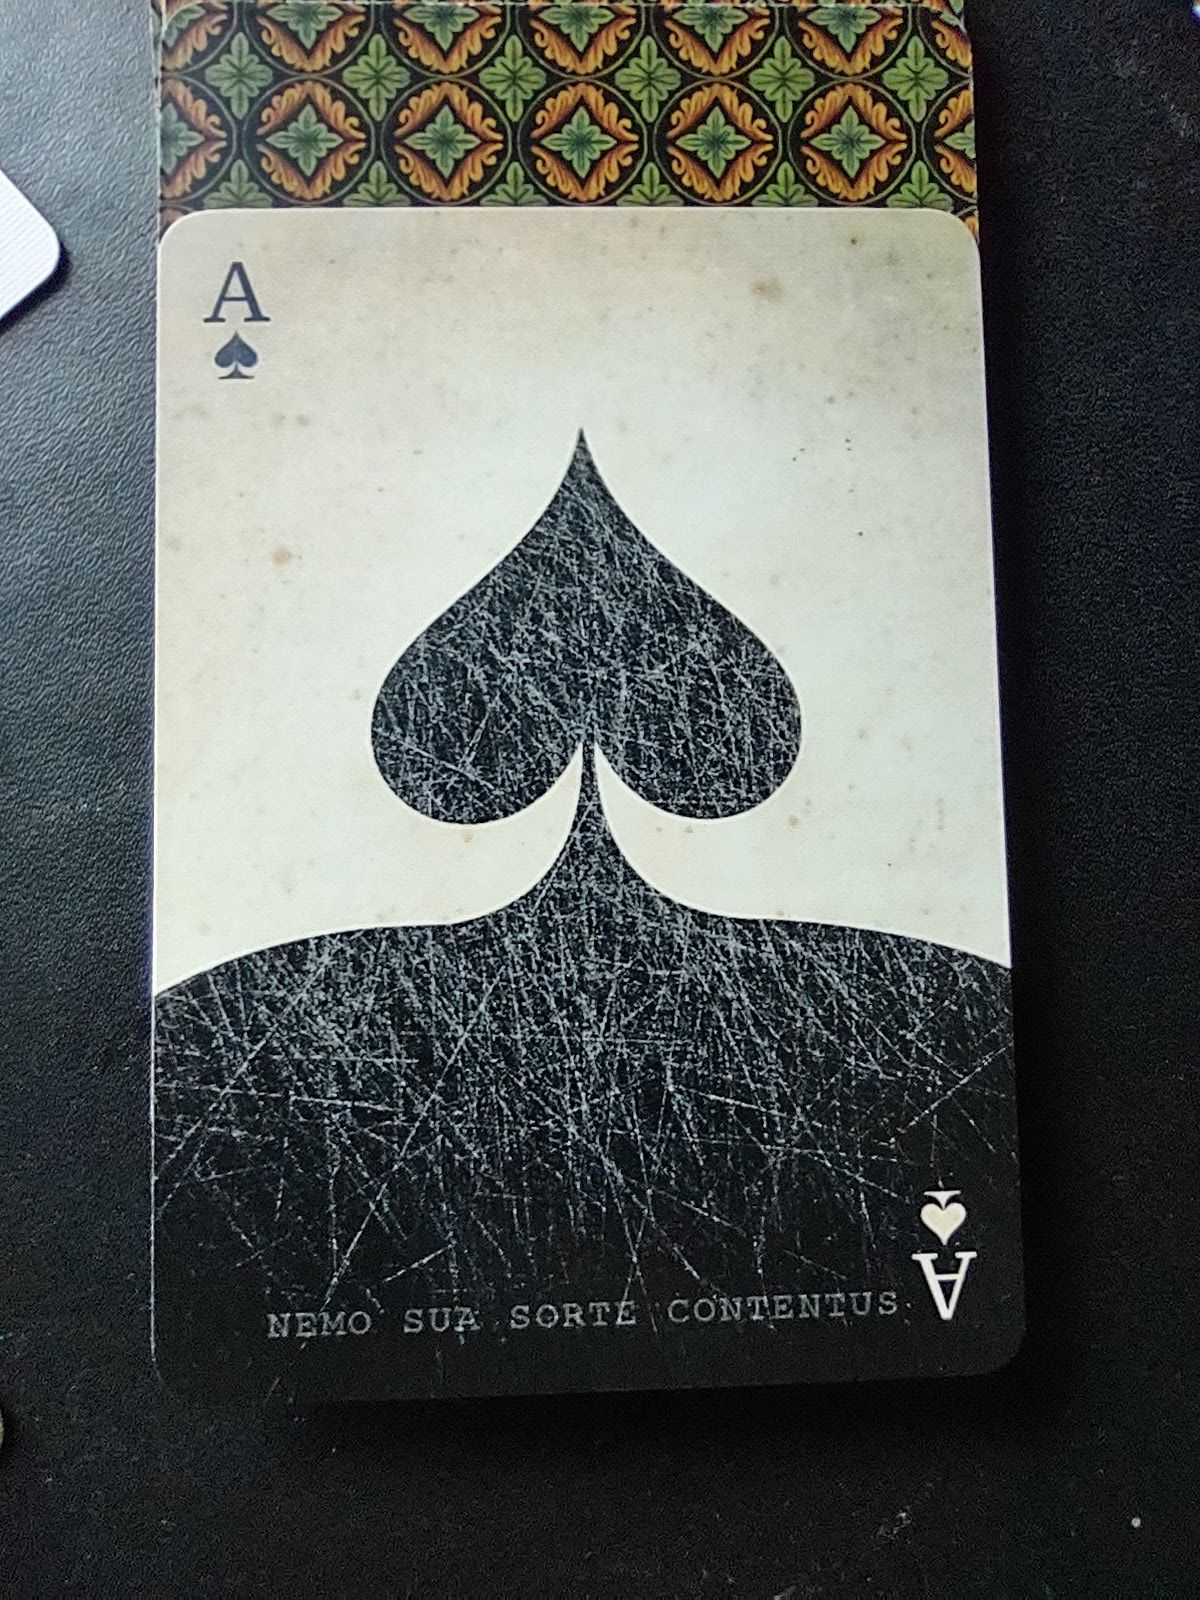 Ace of spades detail